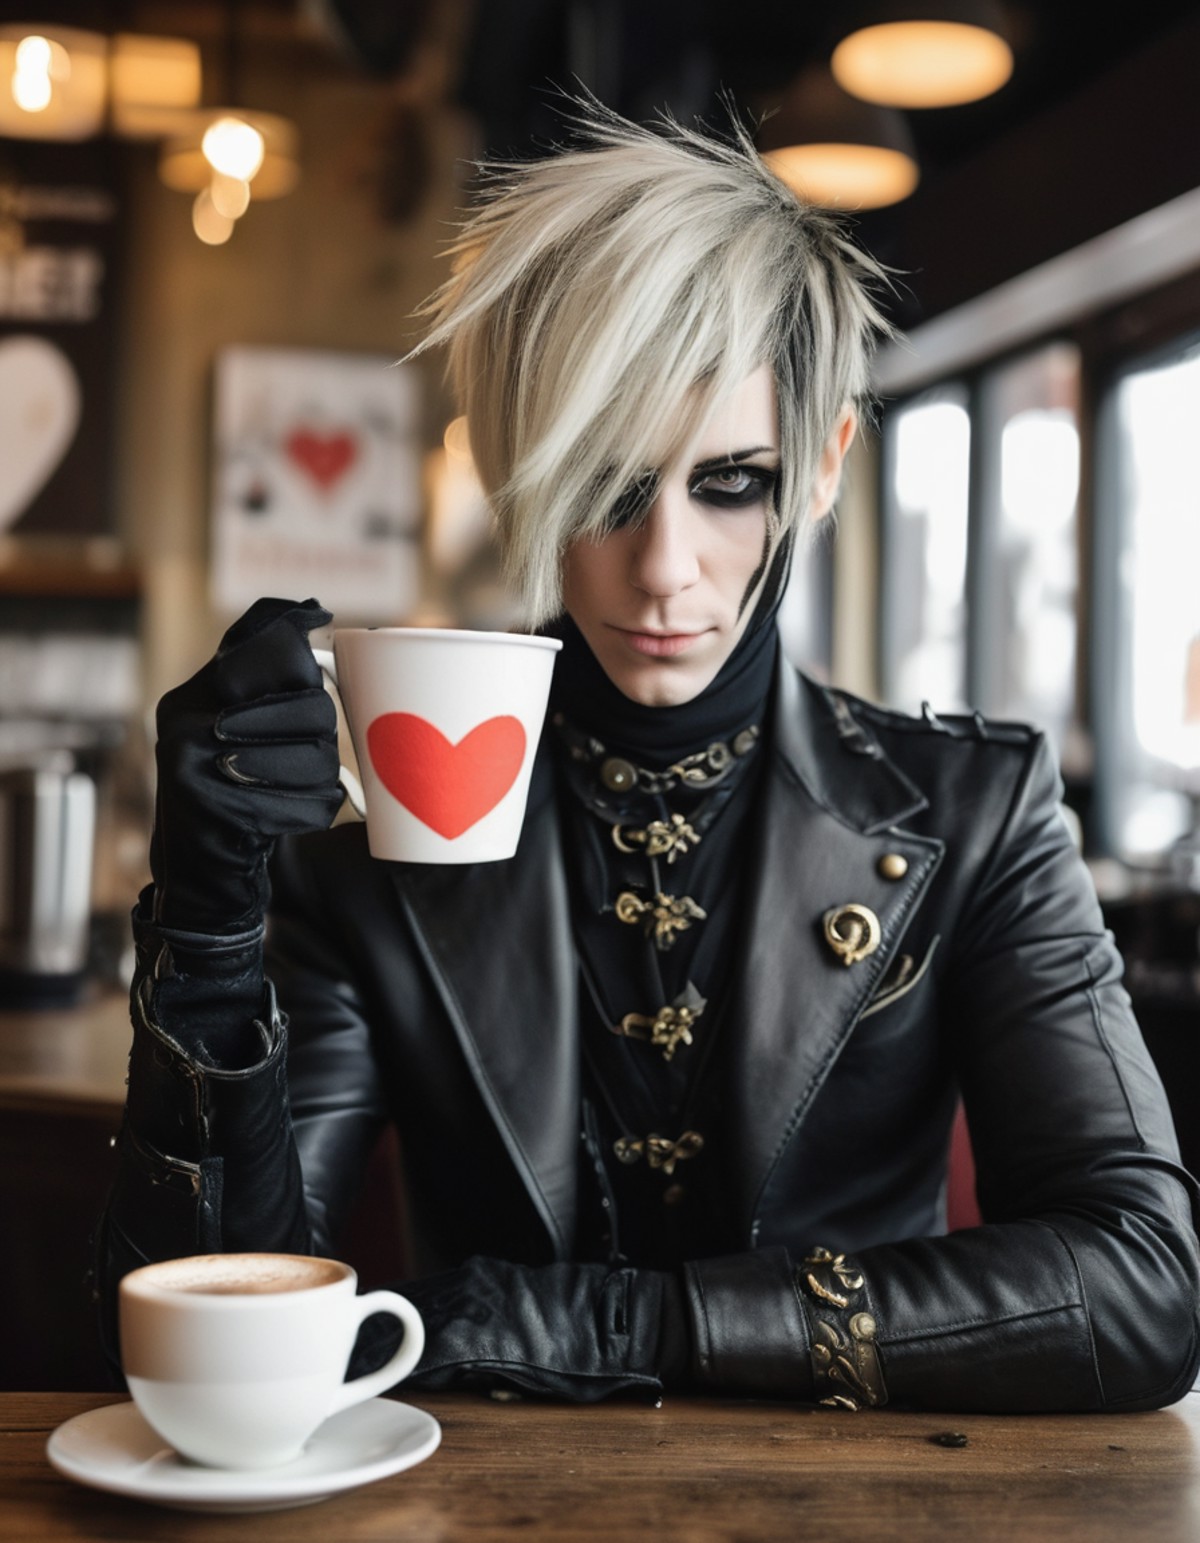 lanky valentines hearts and love drinking coffee in a cafe, Desolate, cosplaying as 9S from Nier, ð¤©, his hair is Gold, ...